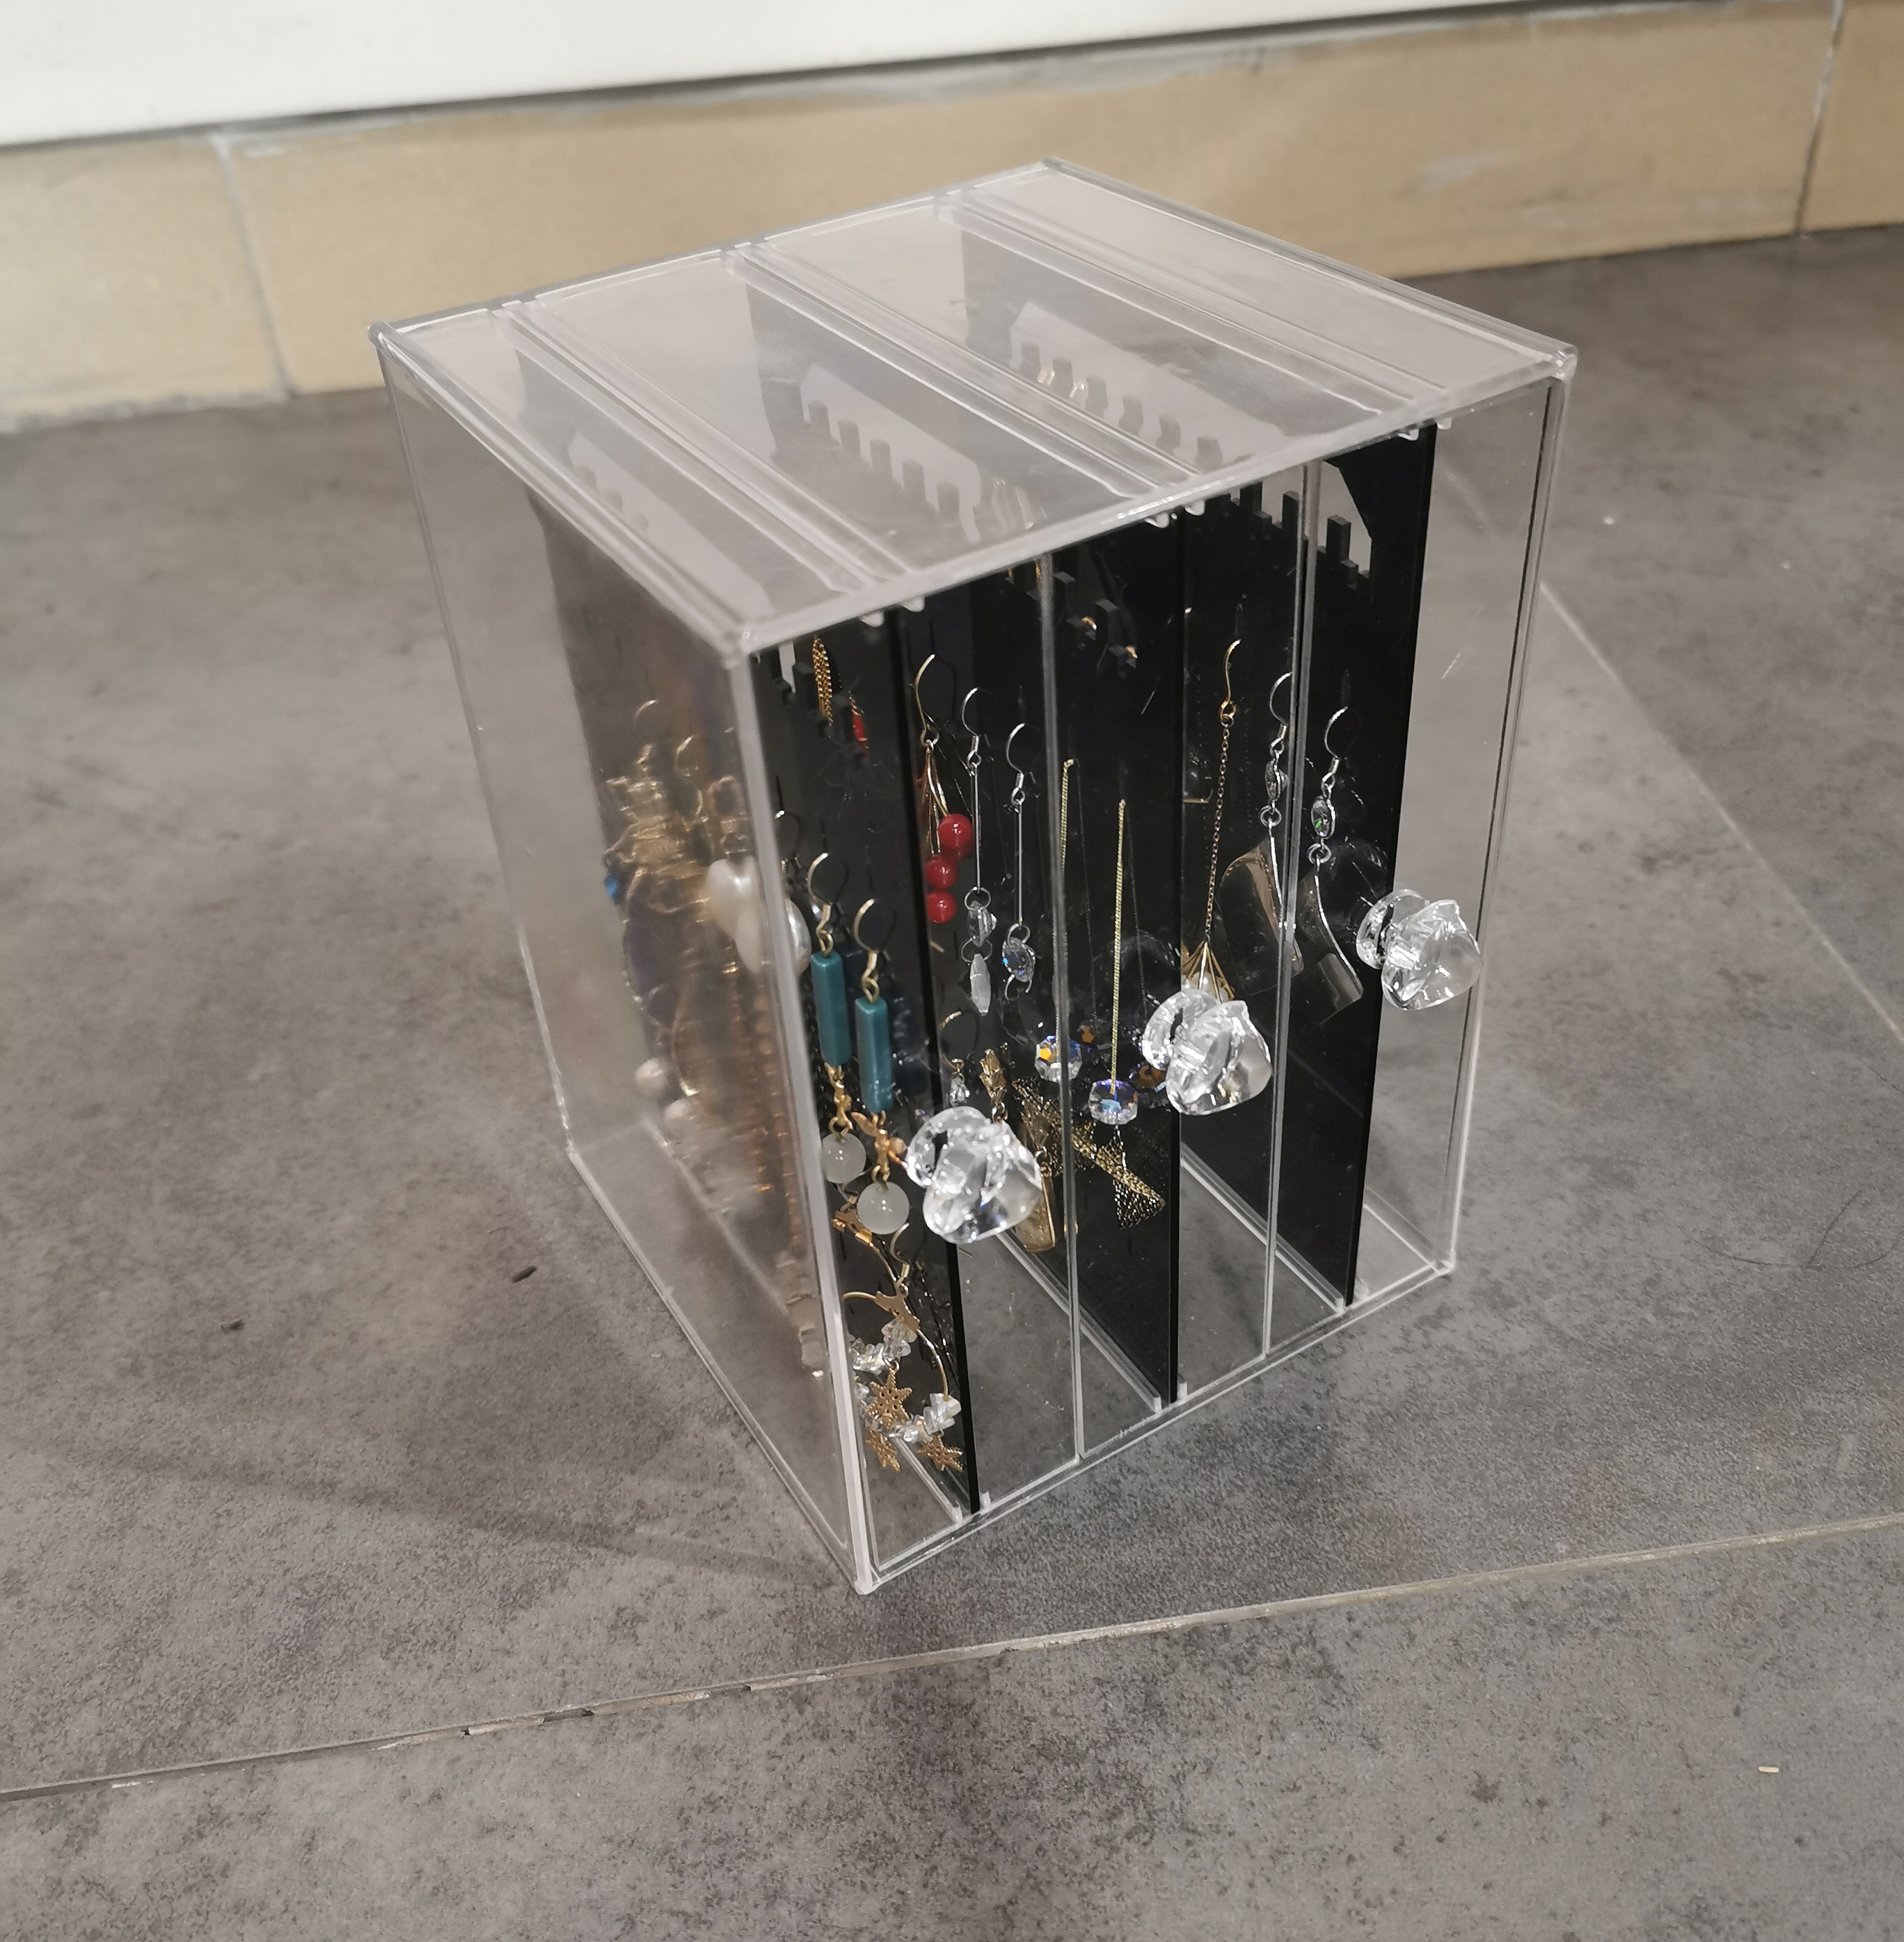 Pricing for acrylic boxes, how much is the custom acrylic box?